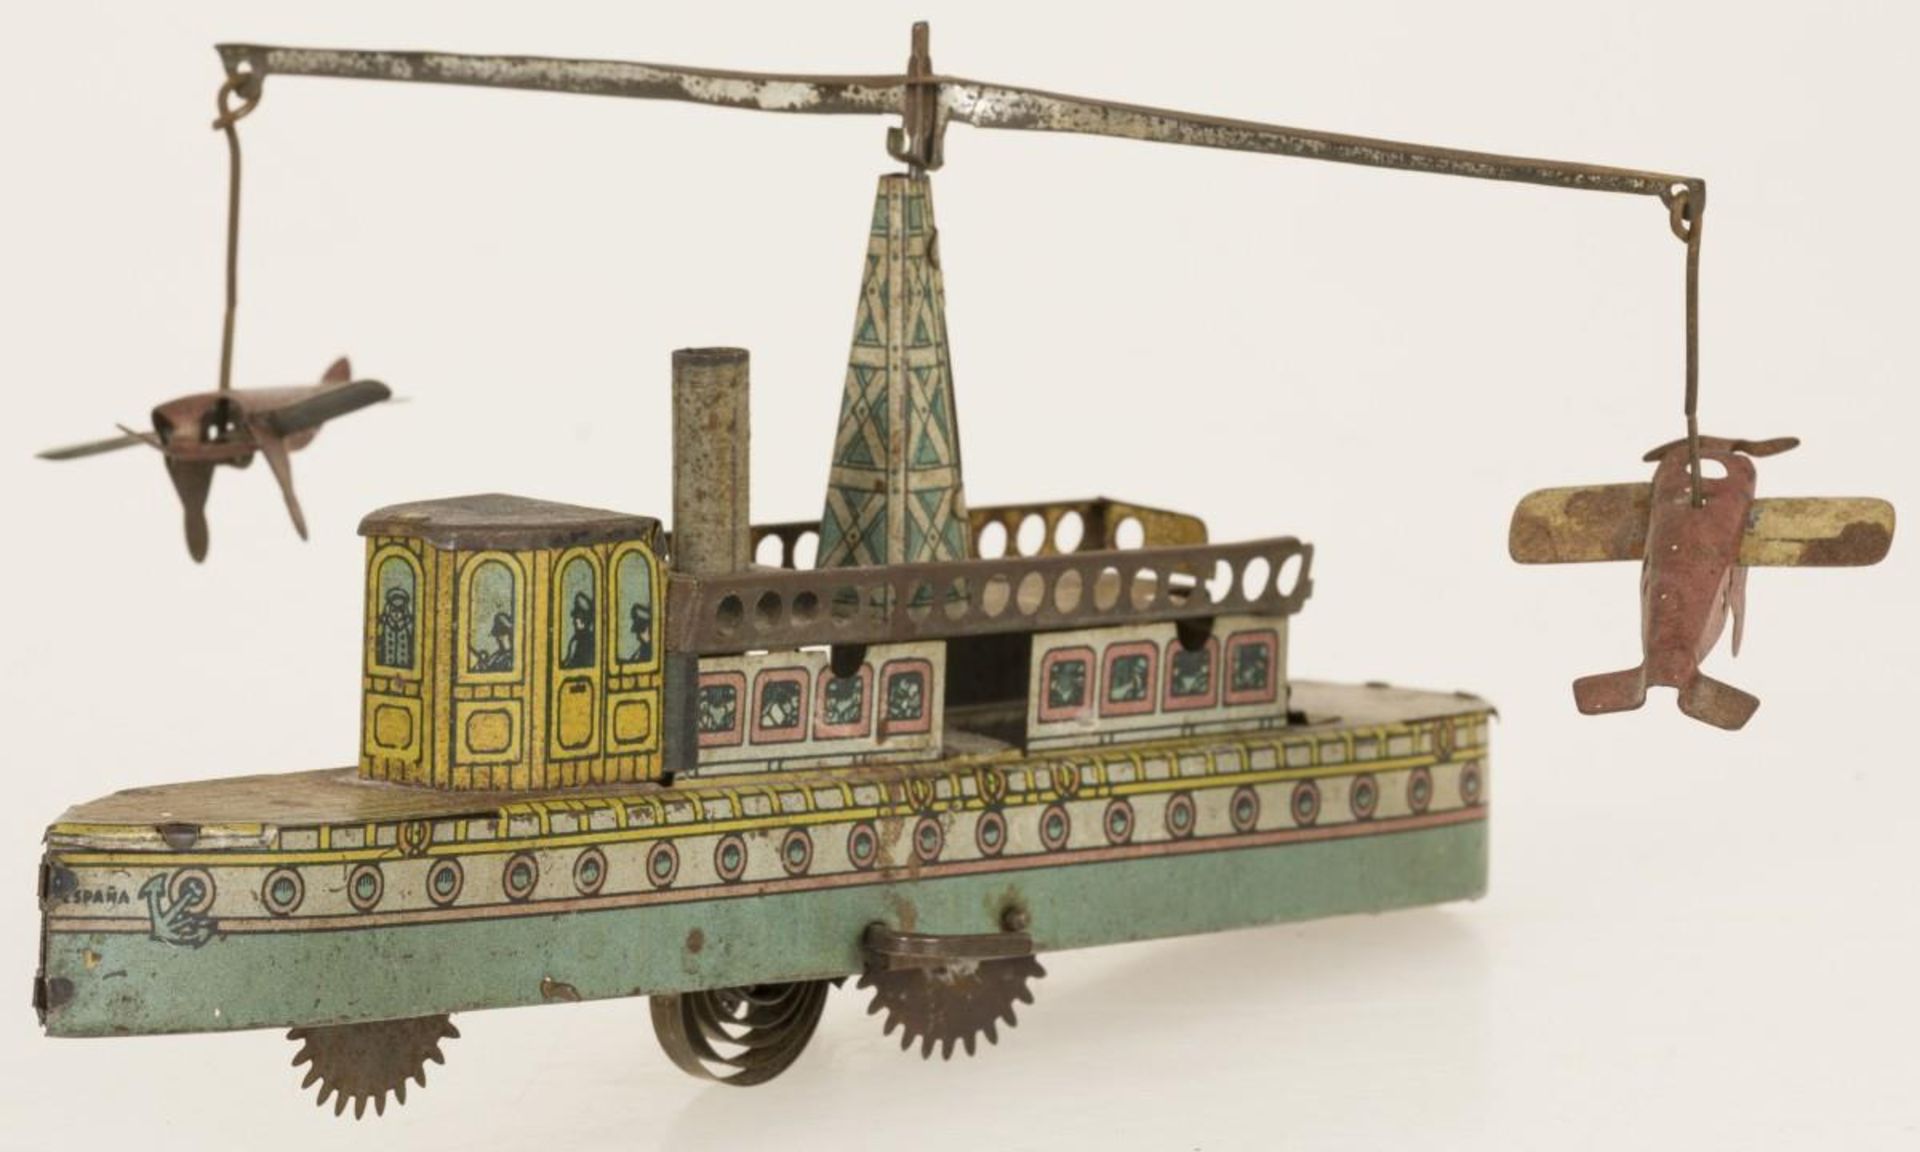 Rico Spain tin wind-up toy ship with airplanes